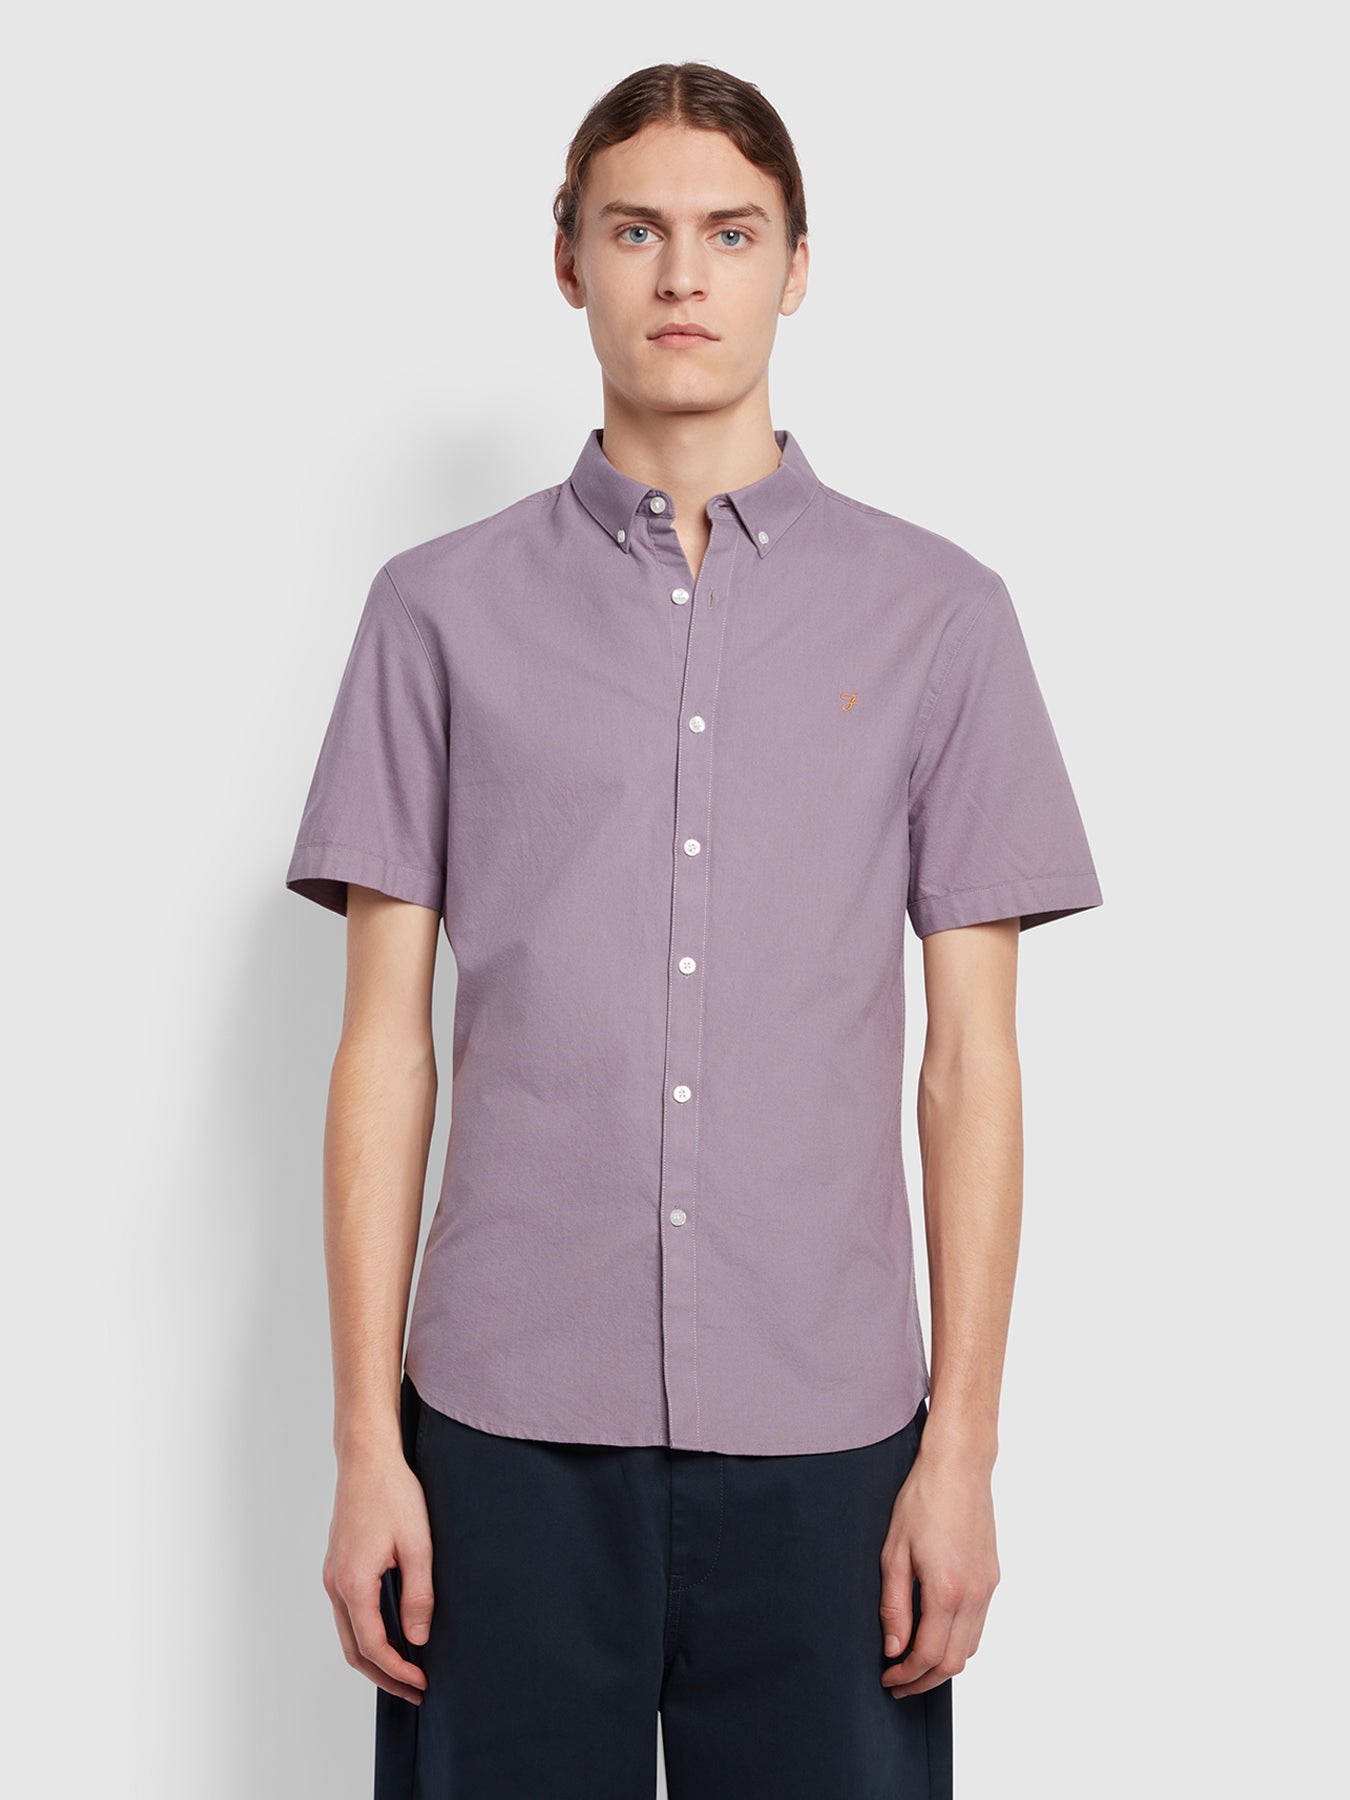 View Brewer Short Sleeve Organic Cotton Oxford Shirt In Dusty Purple information